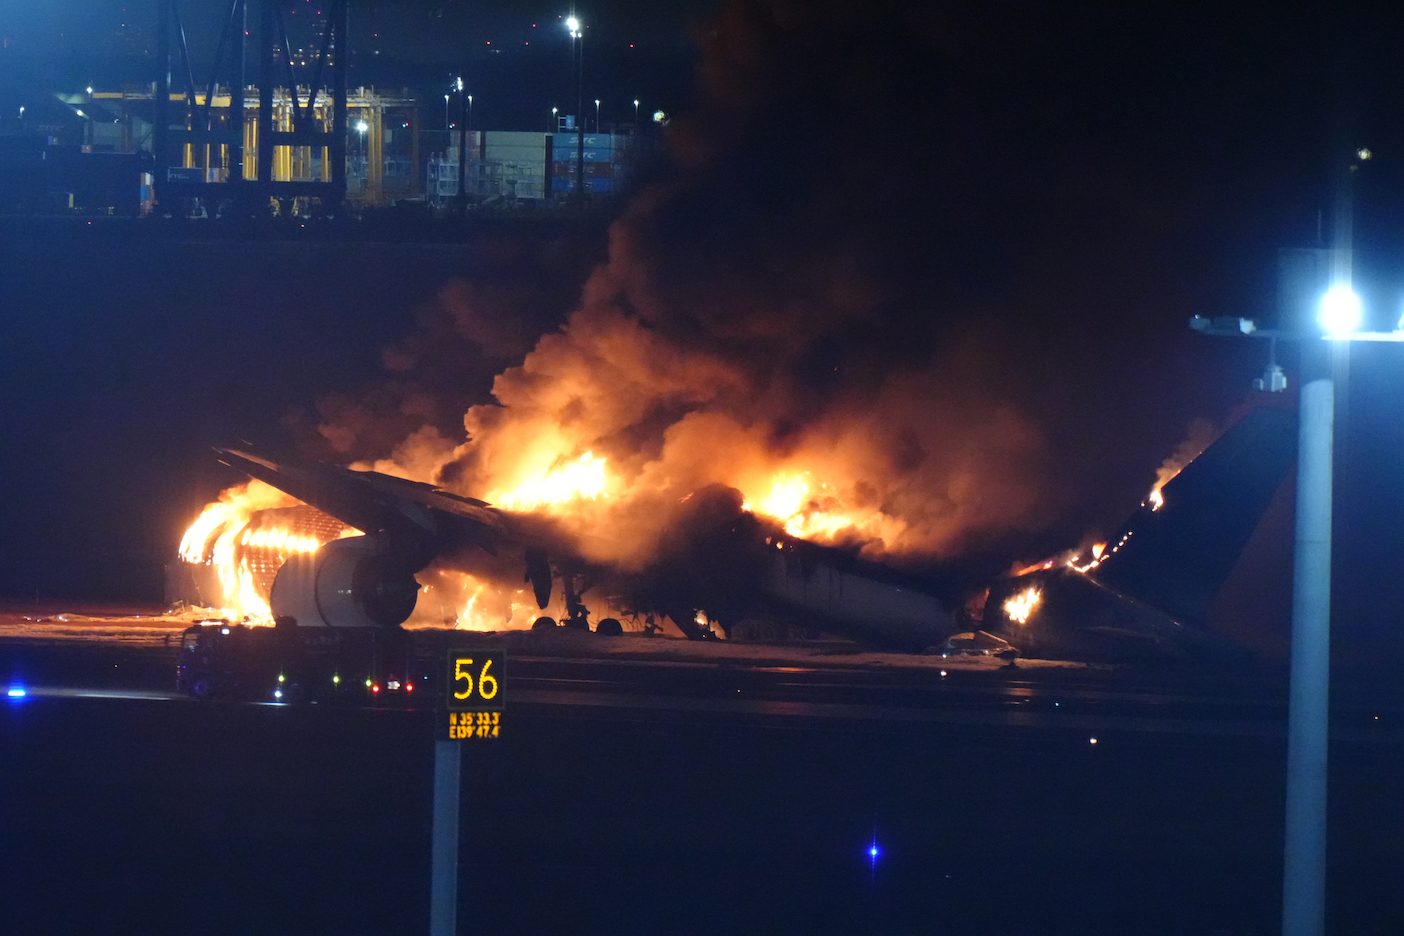 5 dead after JAL airliner crashes into plane at Tokyo airport